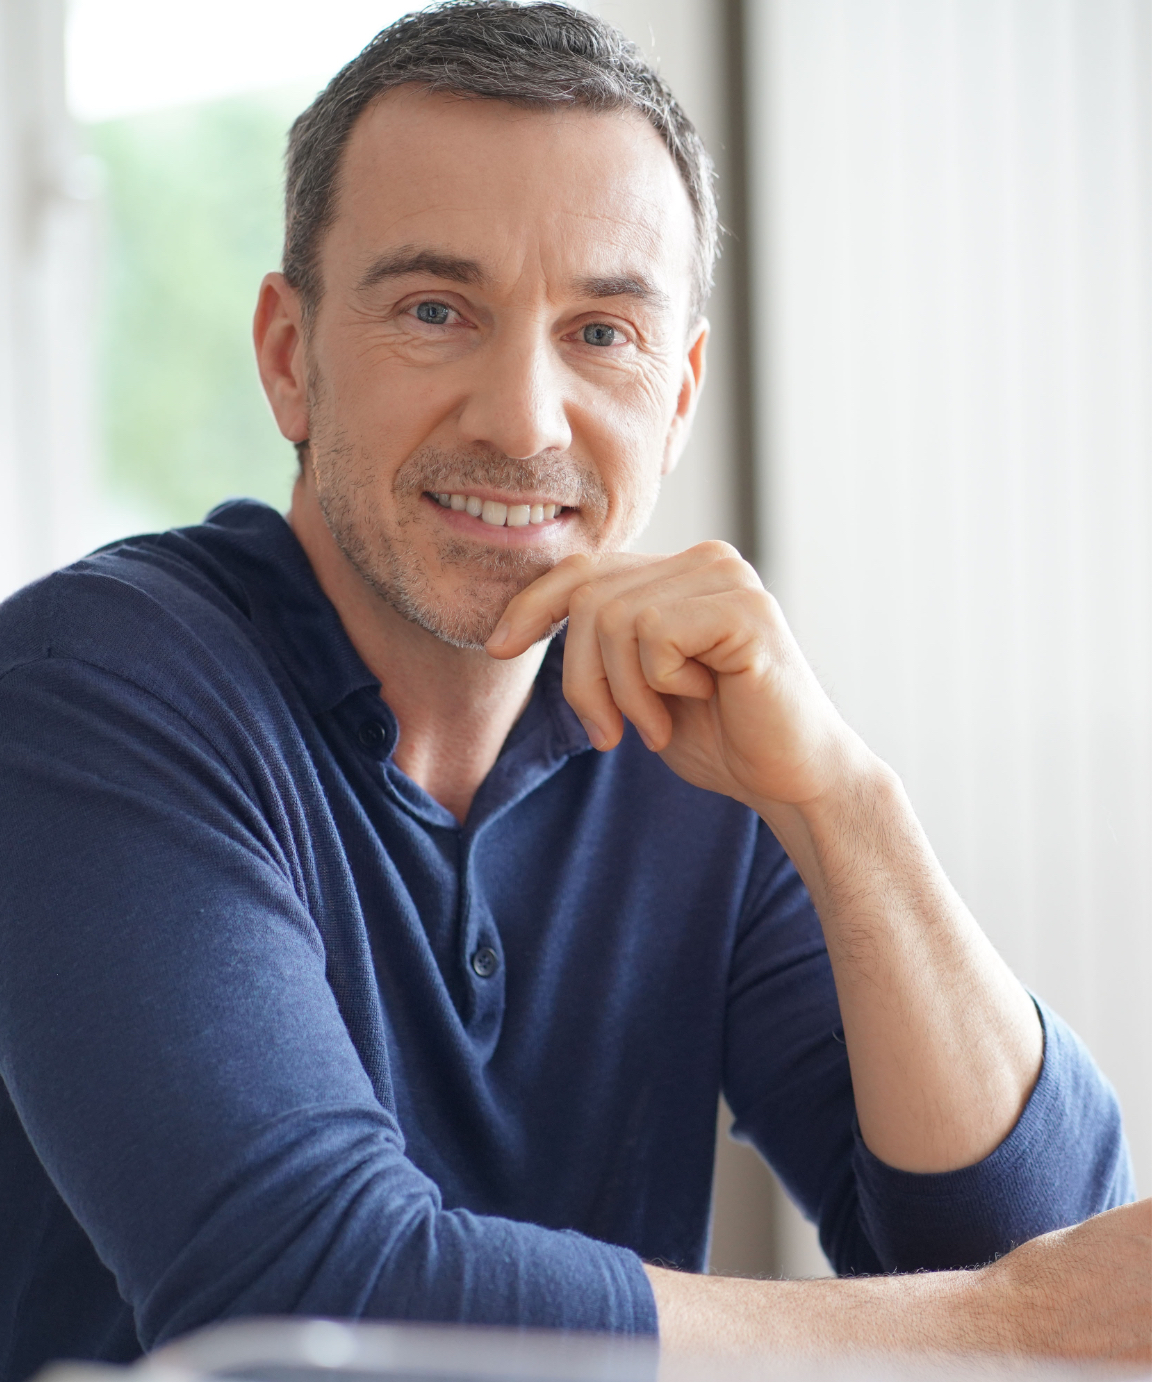 Middle-age man wearing a blue shirt